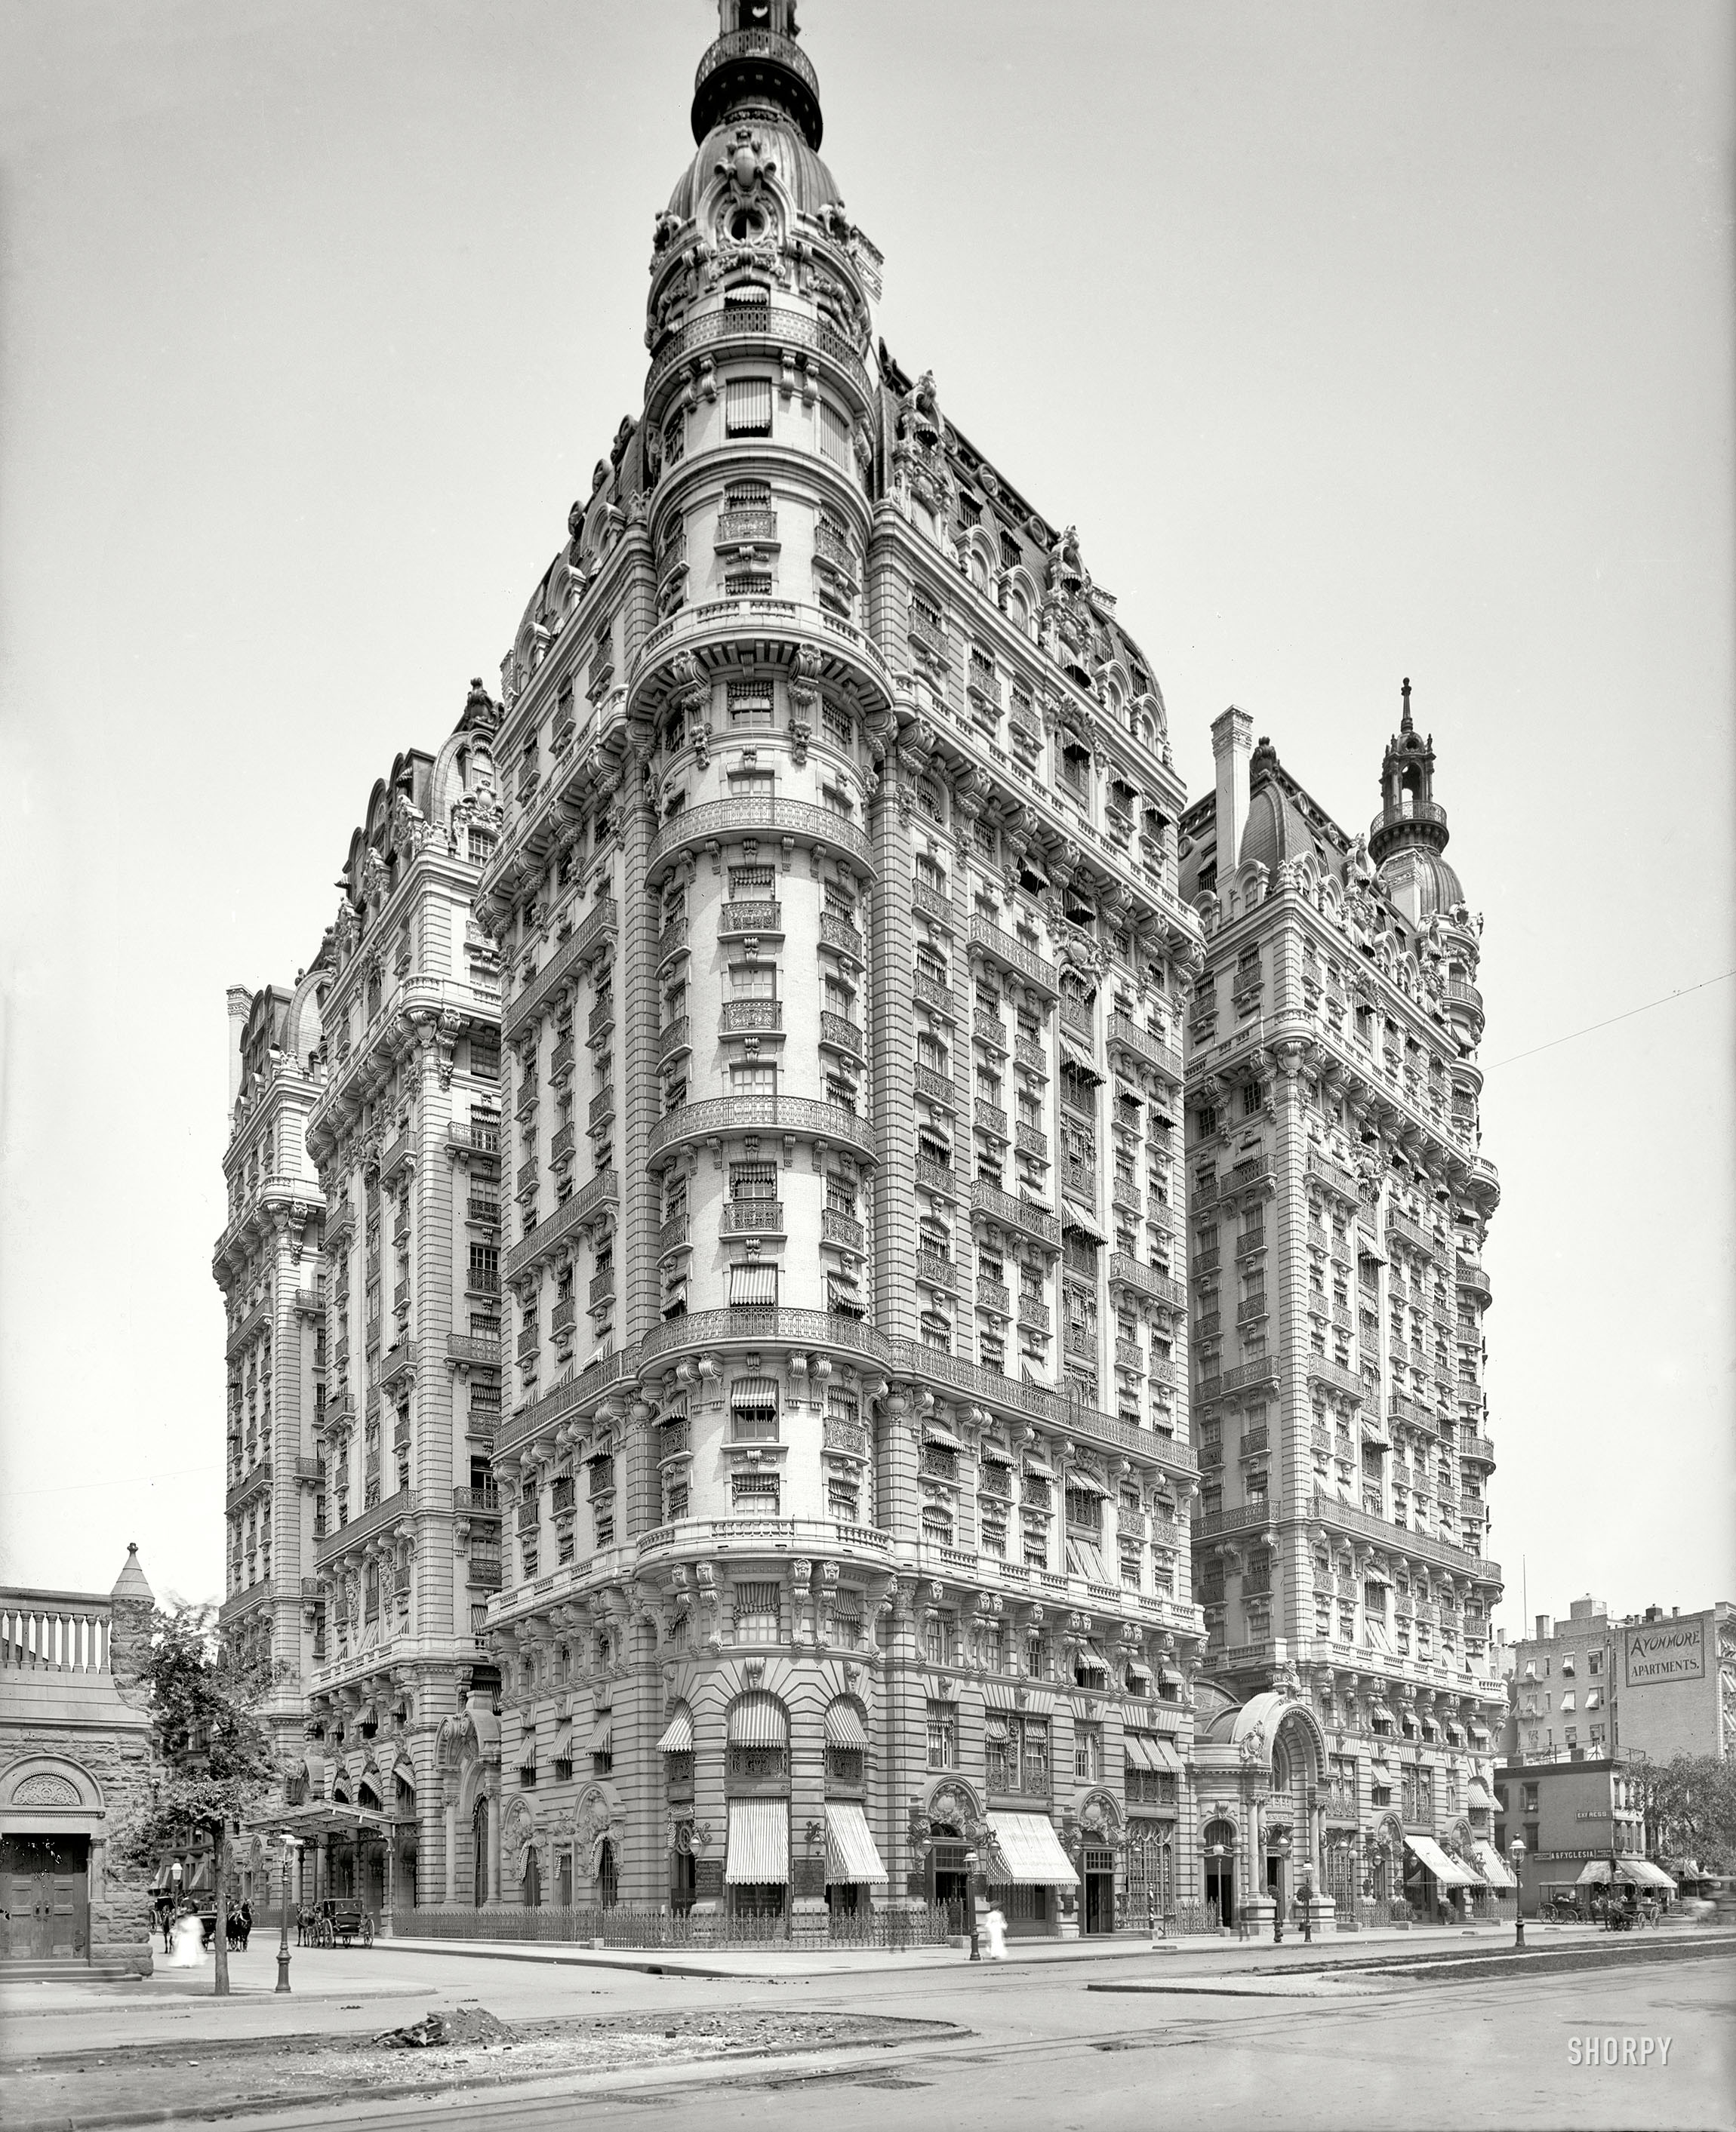 New York circa 1904. "Ansonia Apartments." This Beaux-Arts wedding cake, which still stands at Broadway and West 73rd Street, was last glimpsed here. 8x10 inch dry plate glass negative, Detroit Publishing Company. View full size.